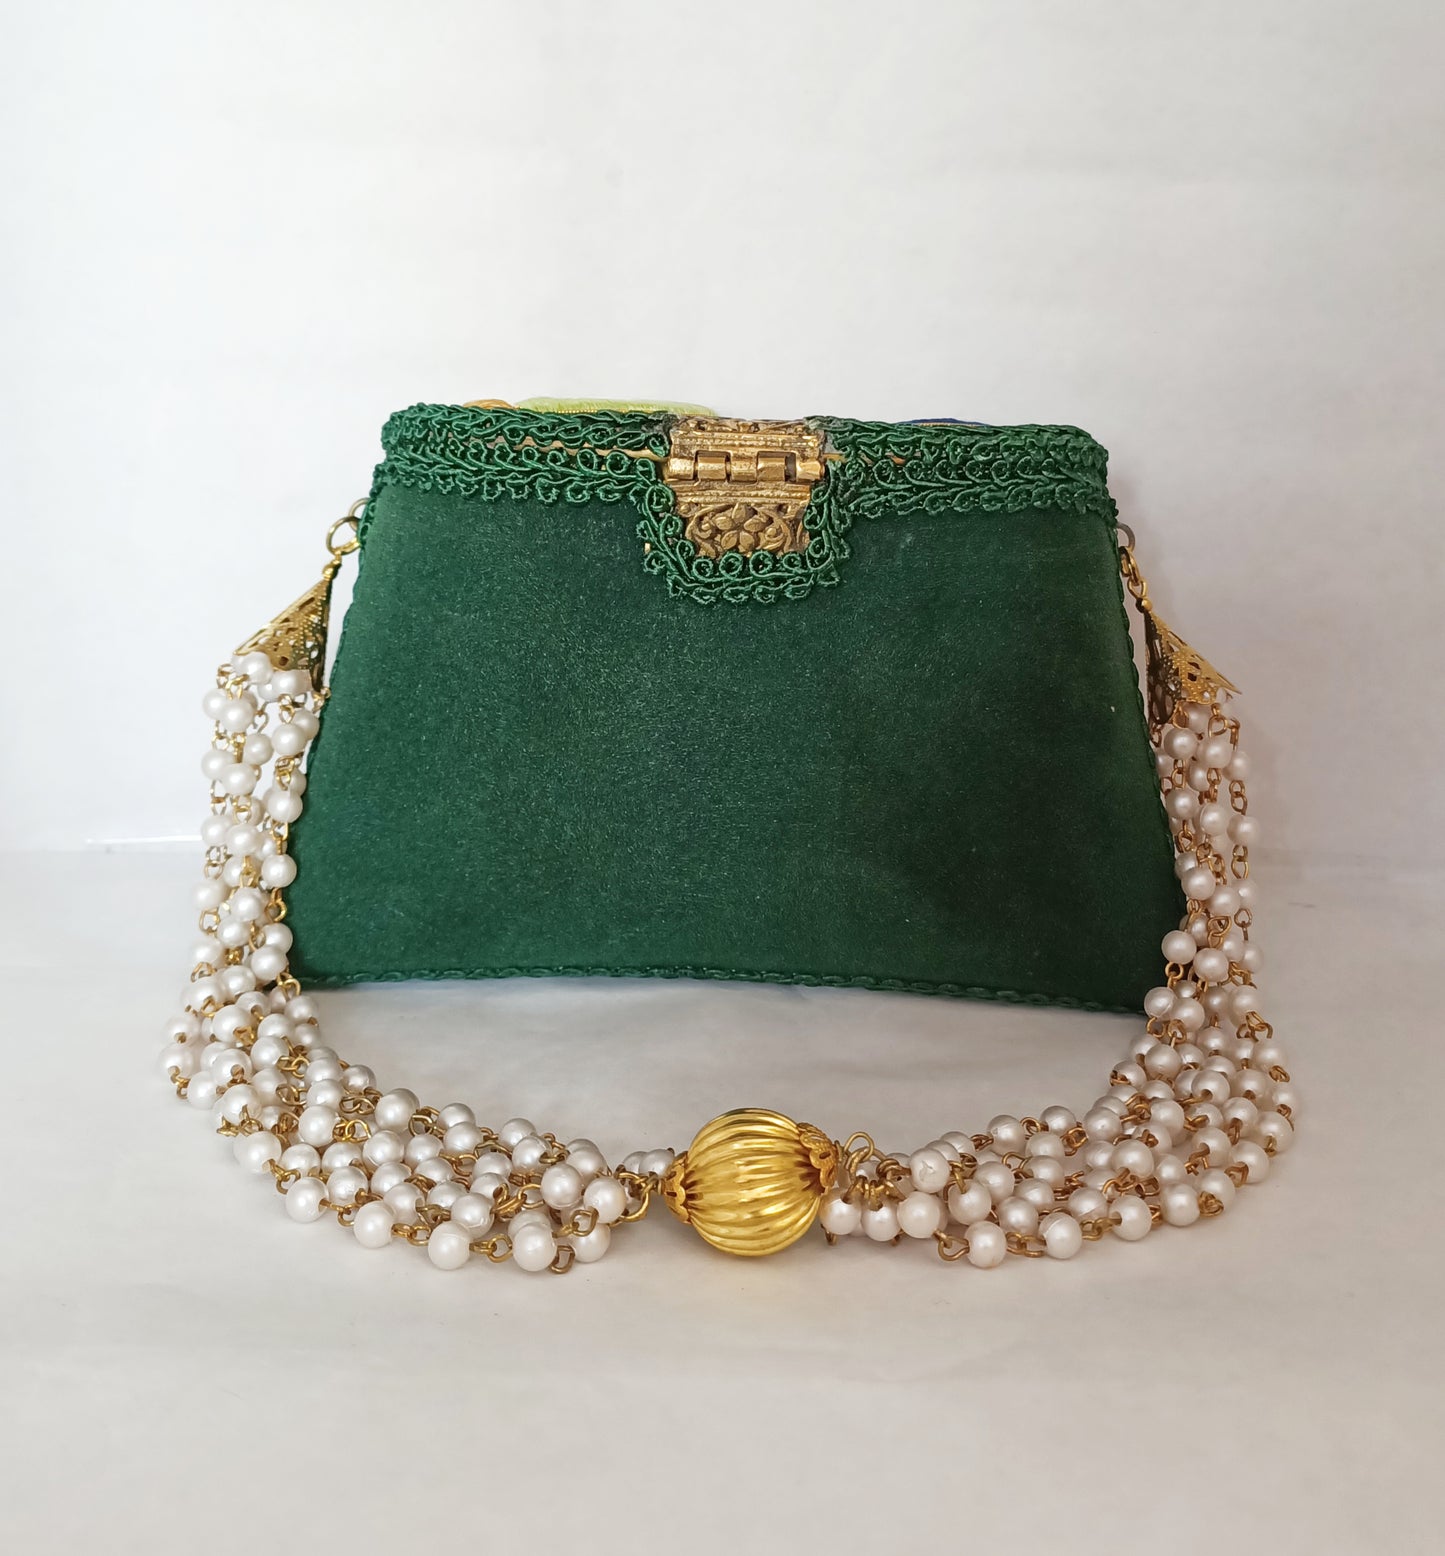 New Peacock Embroidery Purse Dark Green Color